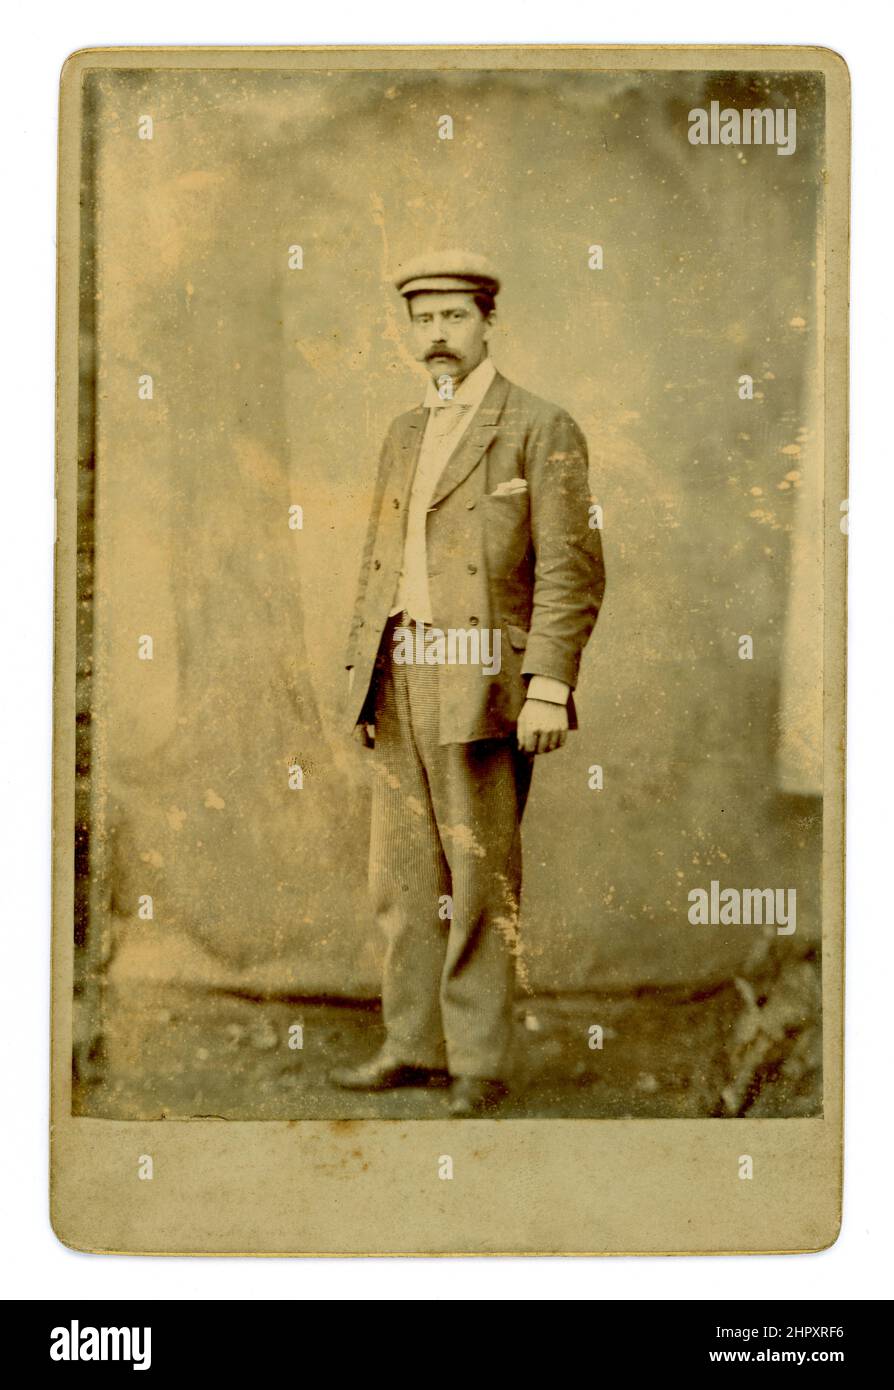 Original Victorian cabinet card portrait of a working class man wearing a flat cap, an ill-fitting suit, with too short sleeves, turned up collar, tie, taken outside with a canvas backdrop against a stone wall - late 1880's, early 1890's, U.K. Stock Photo